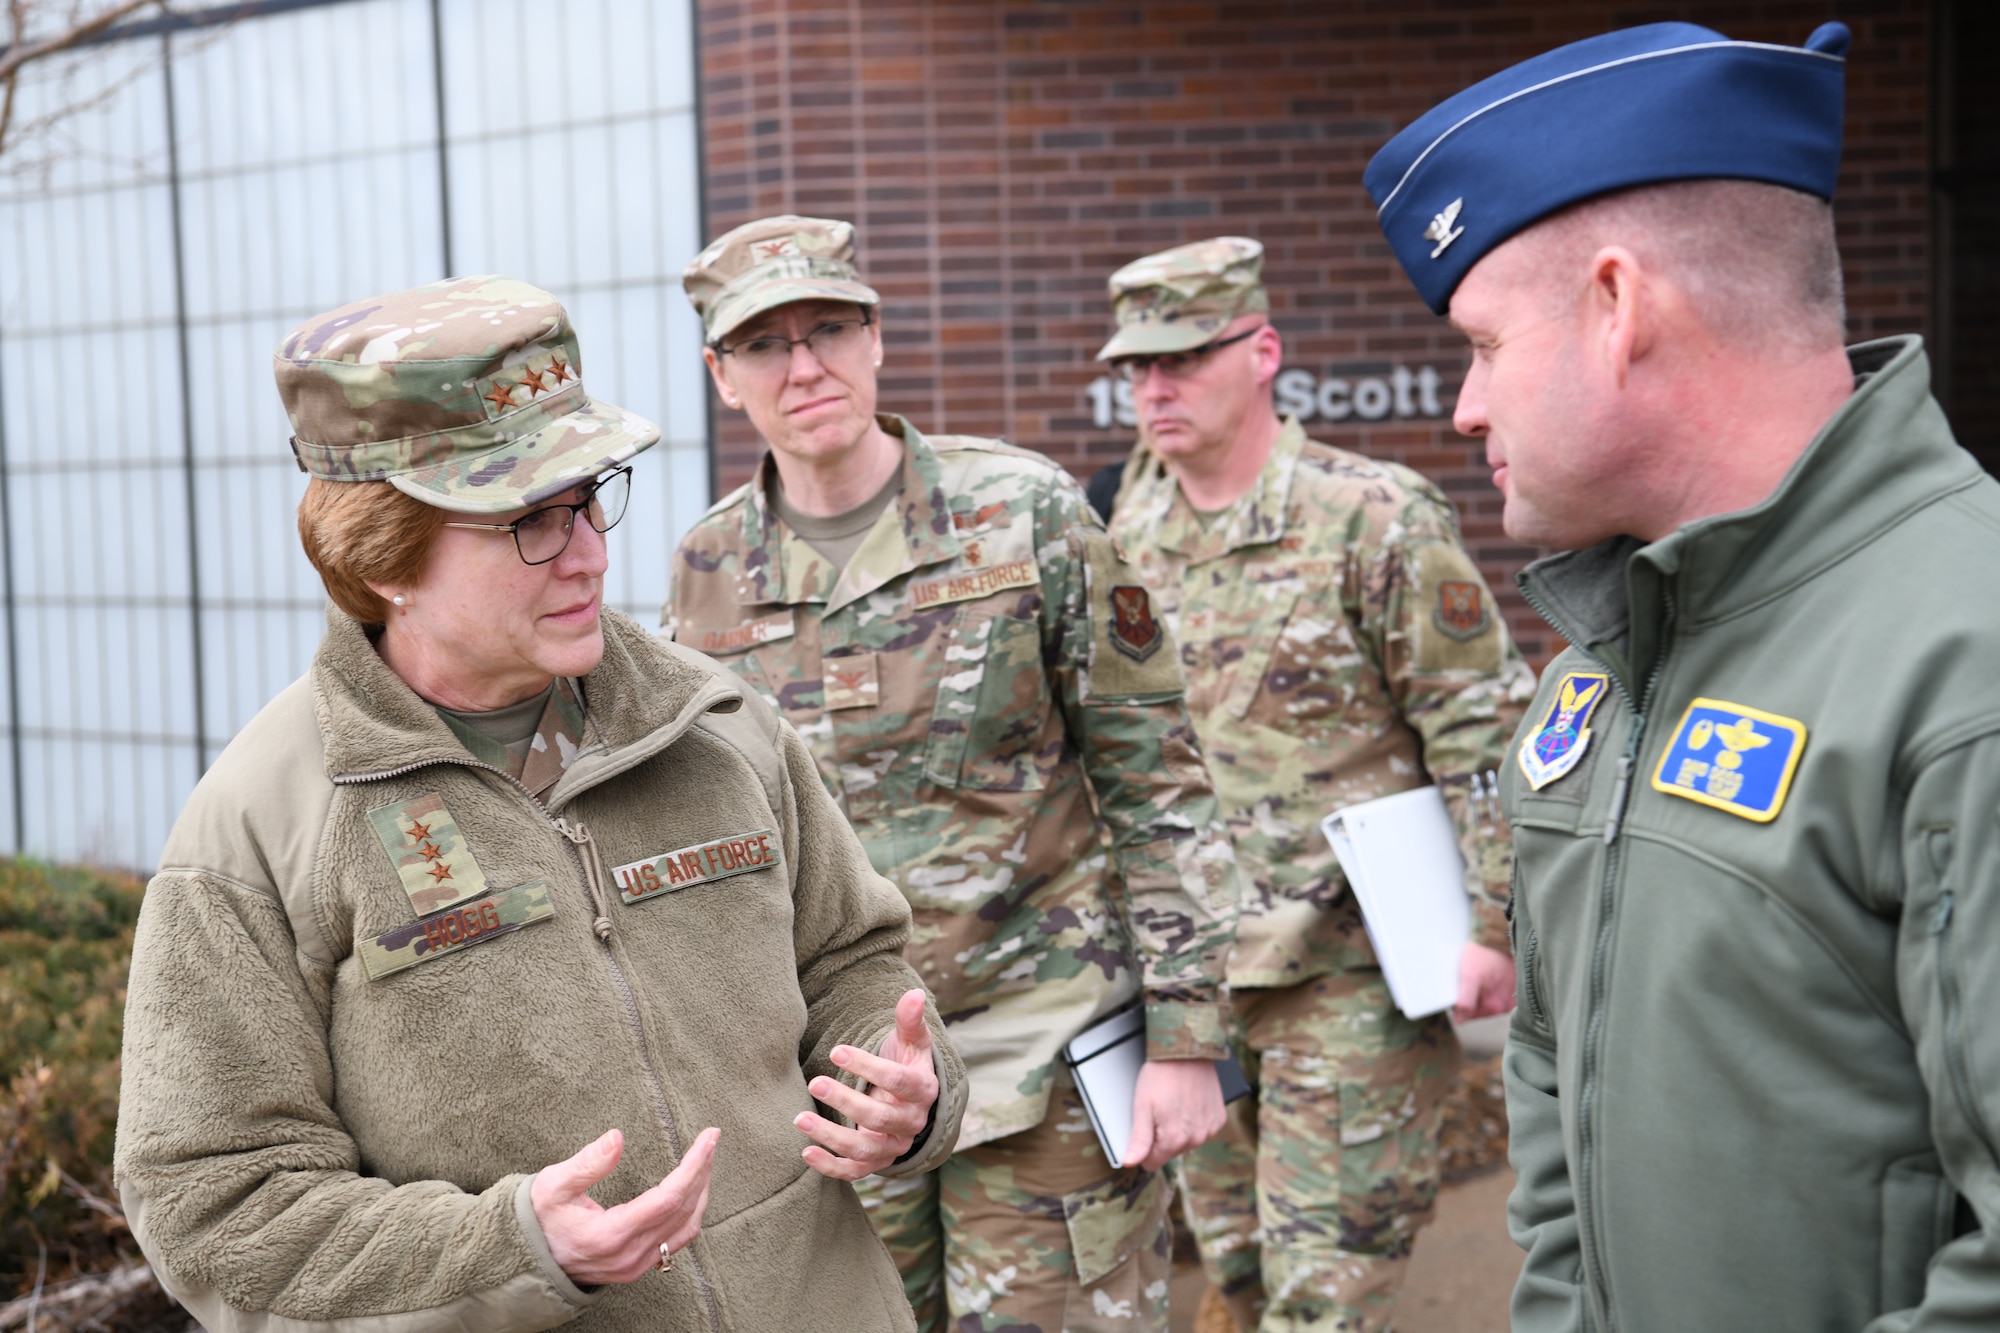 Lt. Gen. Dorothy Hogg, the Air Force surgeon general, speaks with Col. David Doss, 28th Bomb Wing commander, at Ellsworth Air Force Base, S.D., Jan. 30, 2020. During her visit, she visited the base medical facilities, toured a B-1B Lancer and simulator and, most importantly, met with Airmen. (U.S. Air Force photo by Senior Airman Nicolas Z. Erwin)